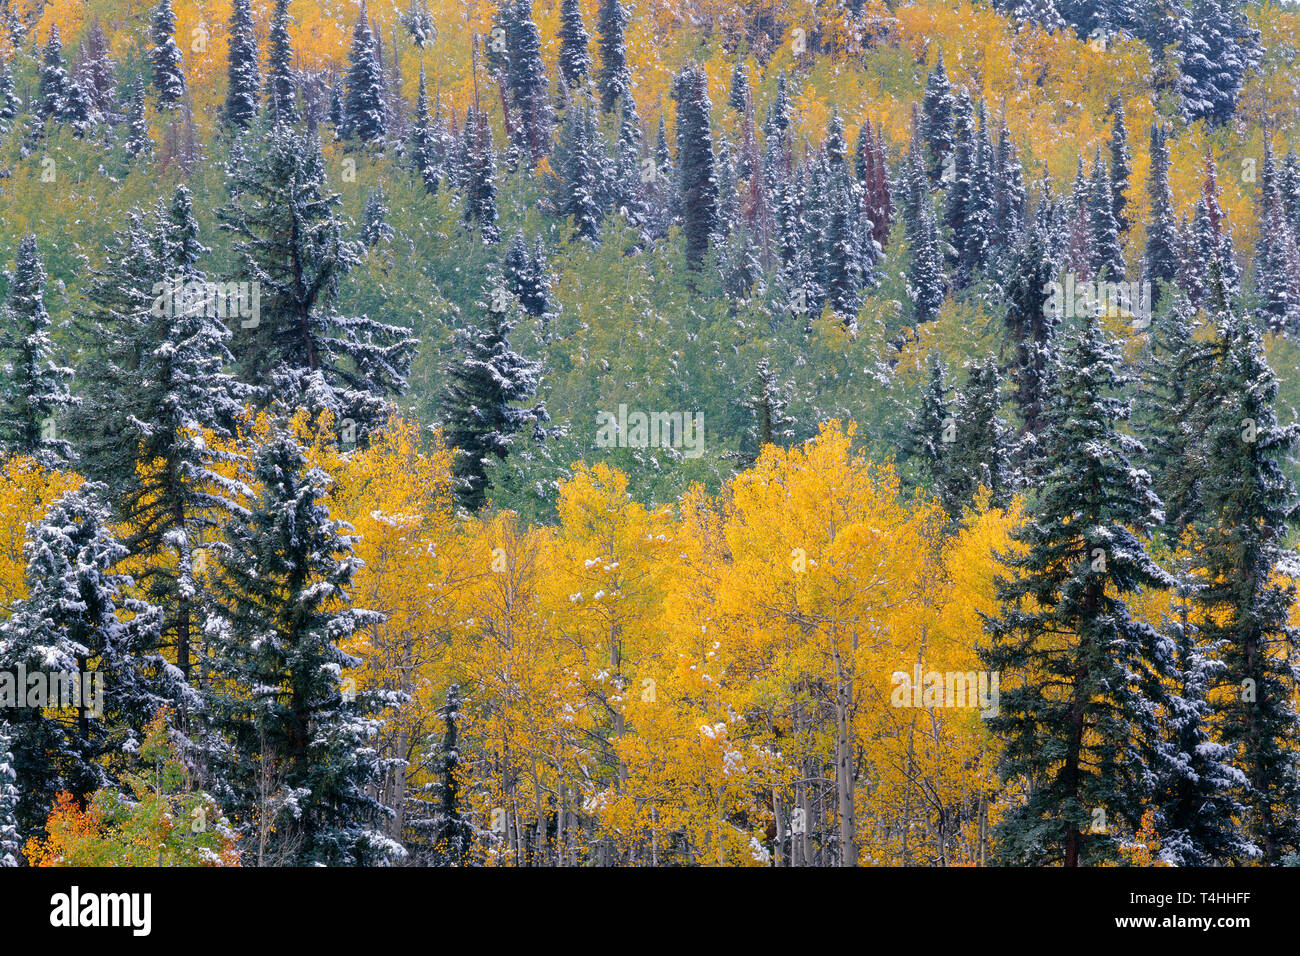 USA, Colorado, Uncompahgre National Forest, Snowfall on fall colored aspen and spruce in the Sneffels Range. Stock Photo